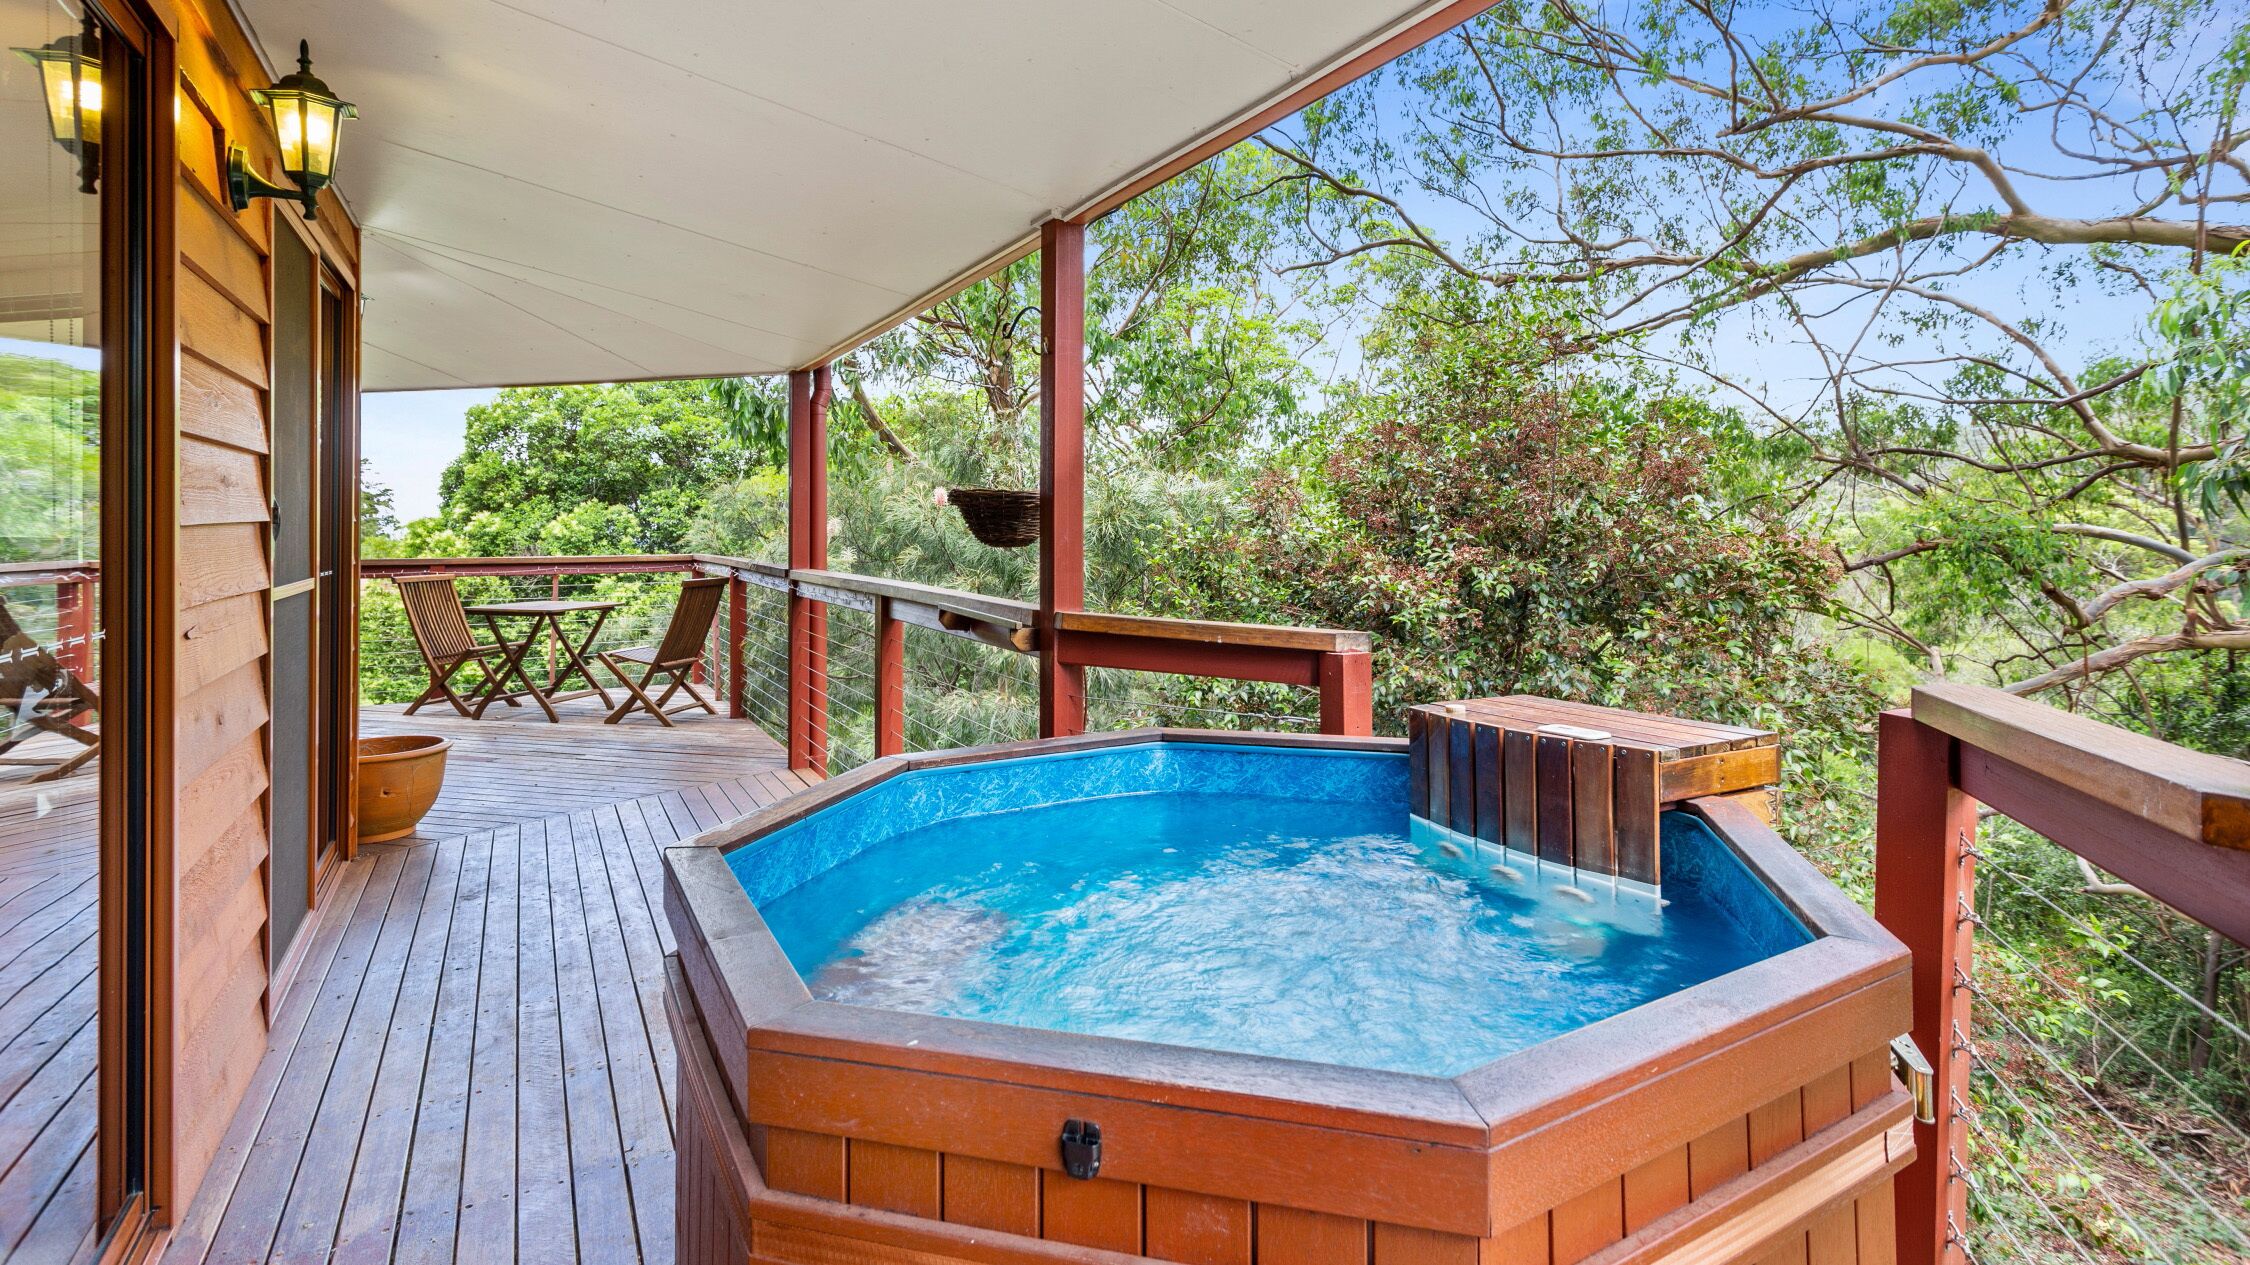 Romantic Luxury Studio in the cool Tree Tops with outdoor hot tub and log fire